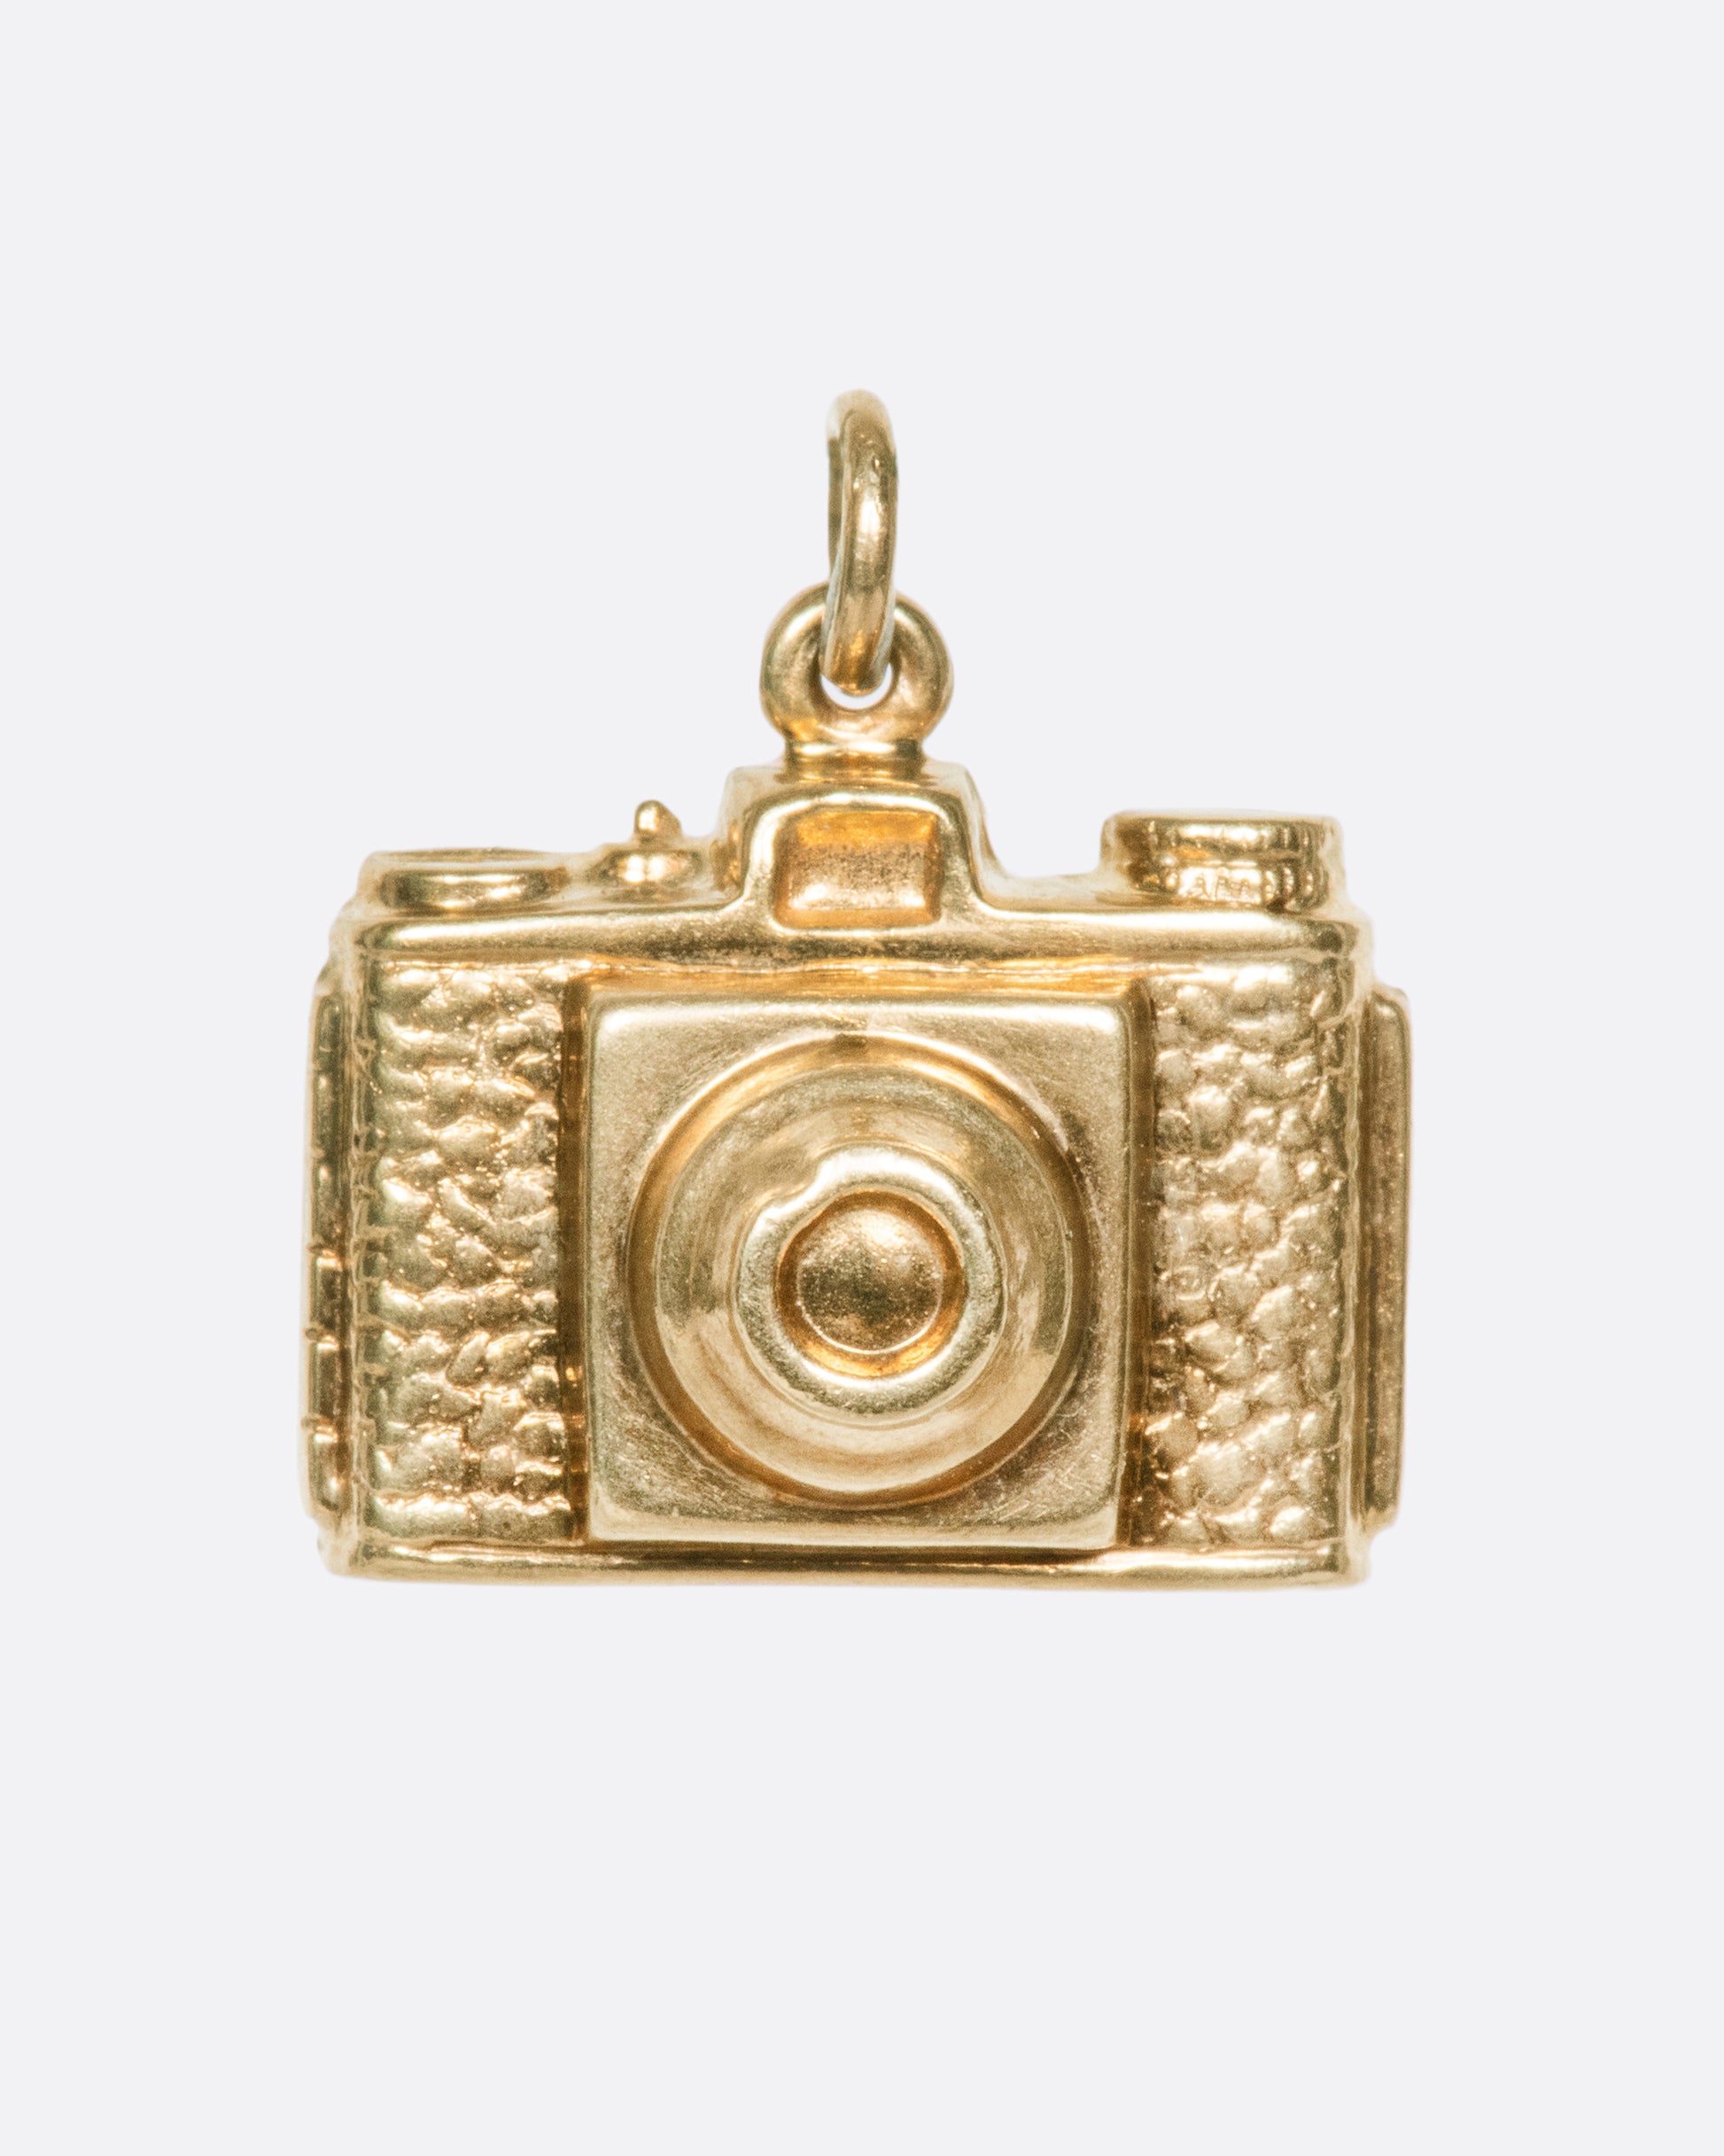 A highly detailed manual camera charm for someone passionate about photography.